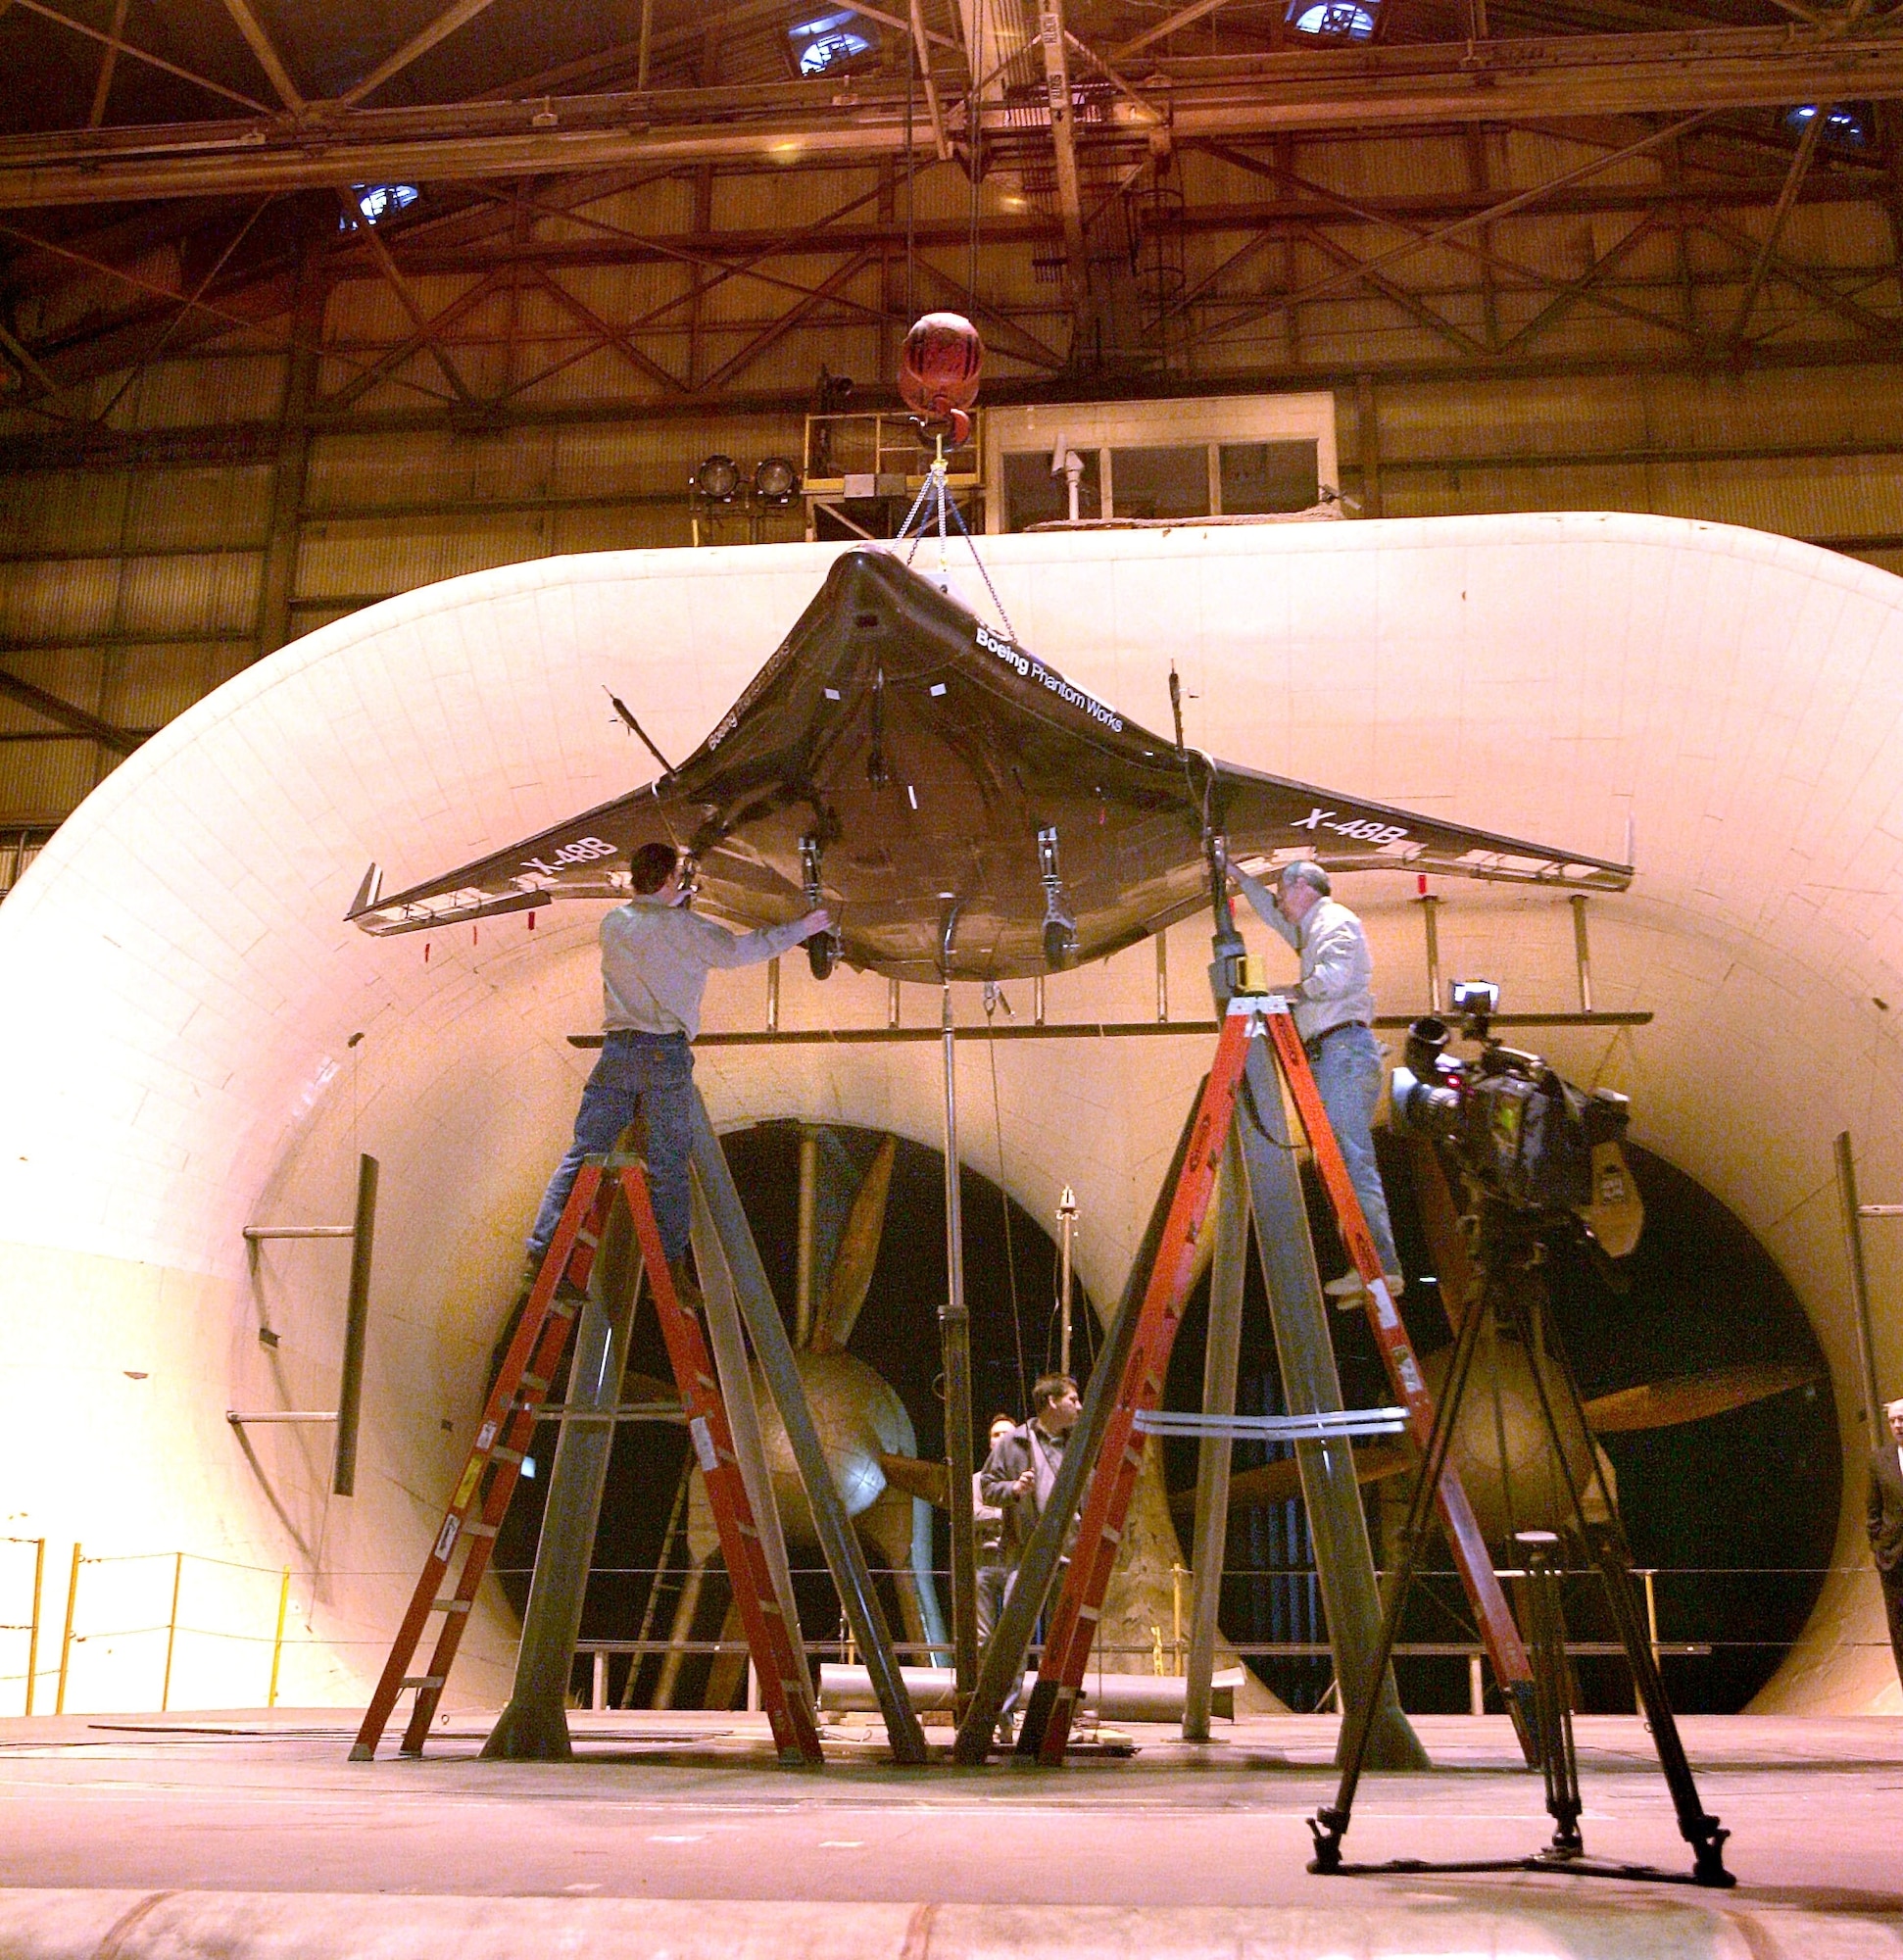 LANGLEY AIR FORCE BASE, Va.— Boeing, NASA and Cranfield Aerospace technicians complete installation of the first X-48B research aircraft at the Langley Full-Scale Tunnel. The test vehicle successfully completed 250 hours of wind tunnel testing in mid-May. (Courtesy photo)

